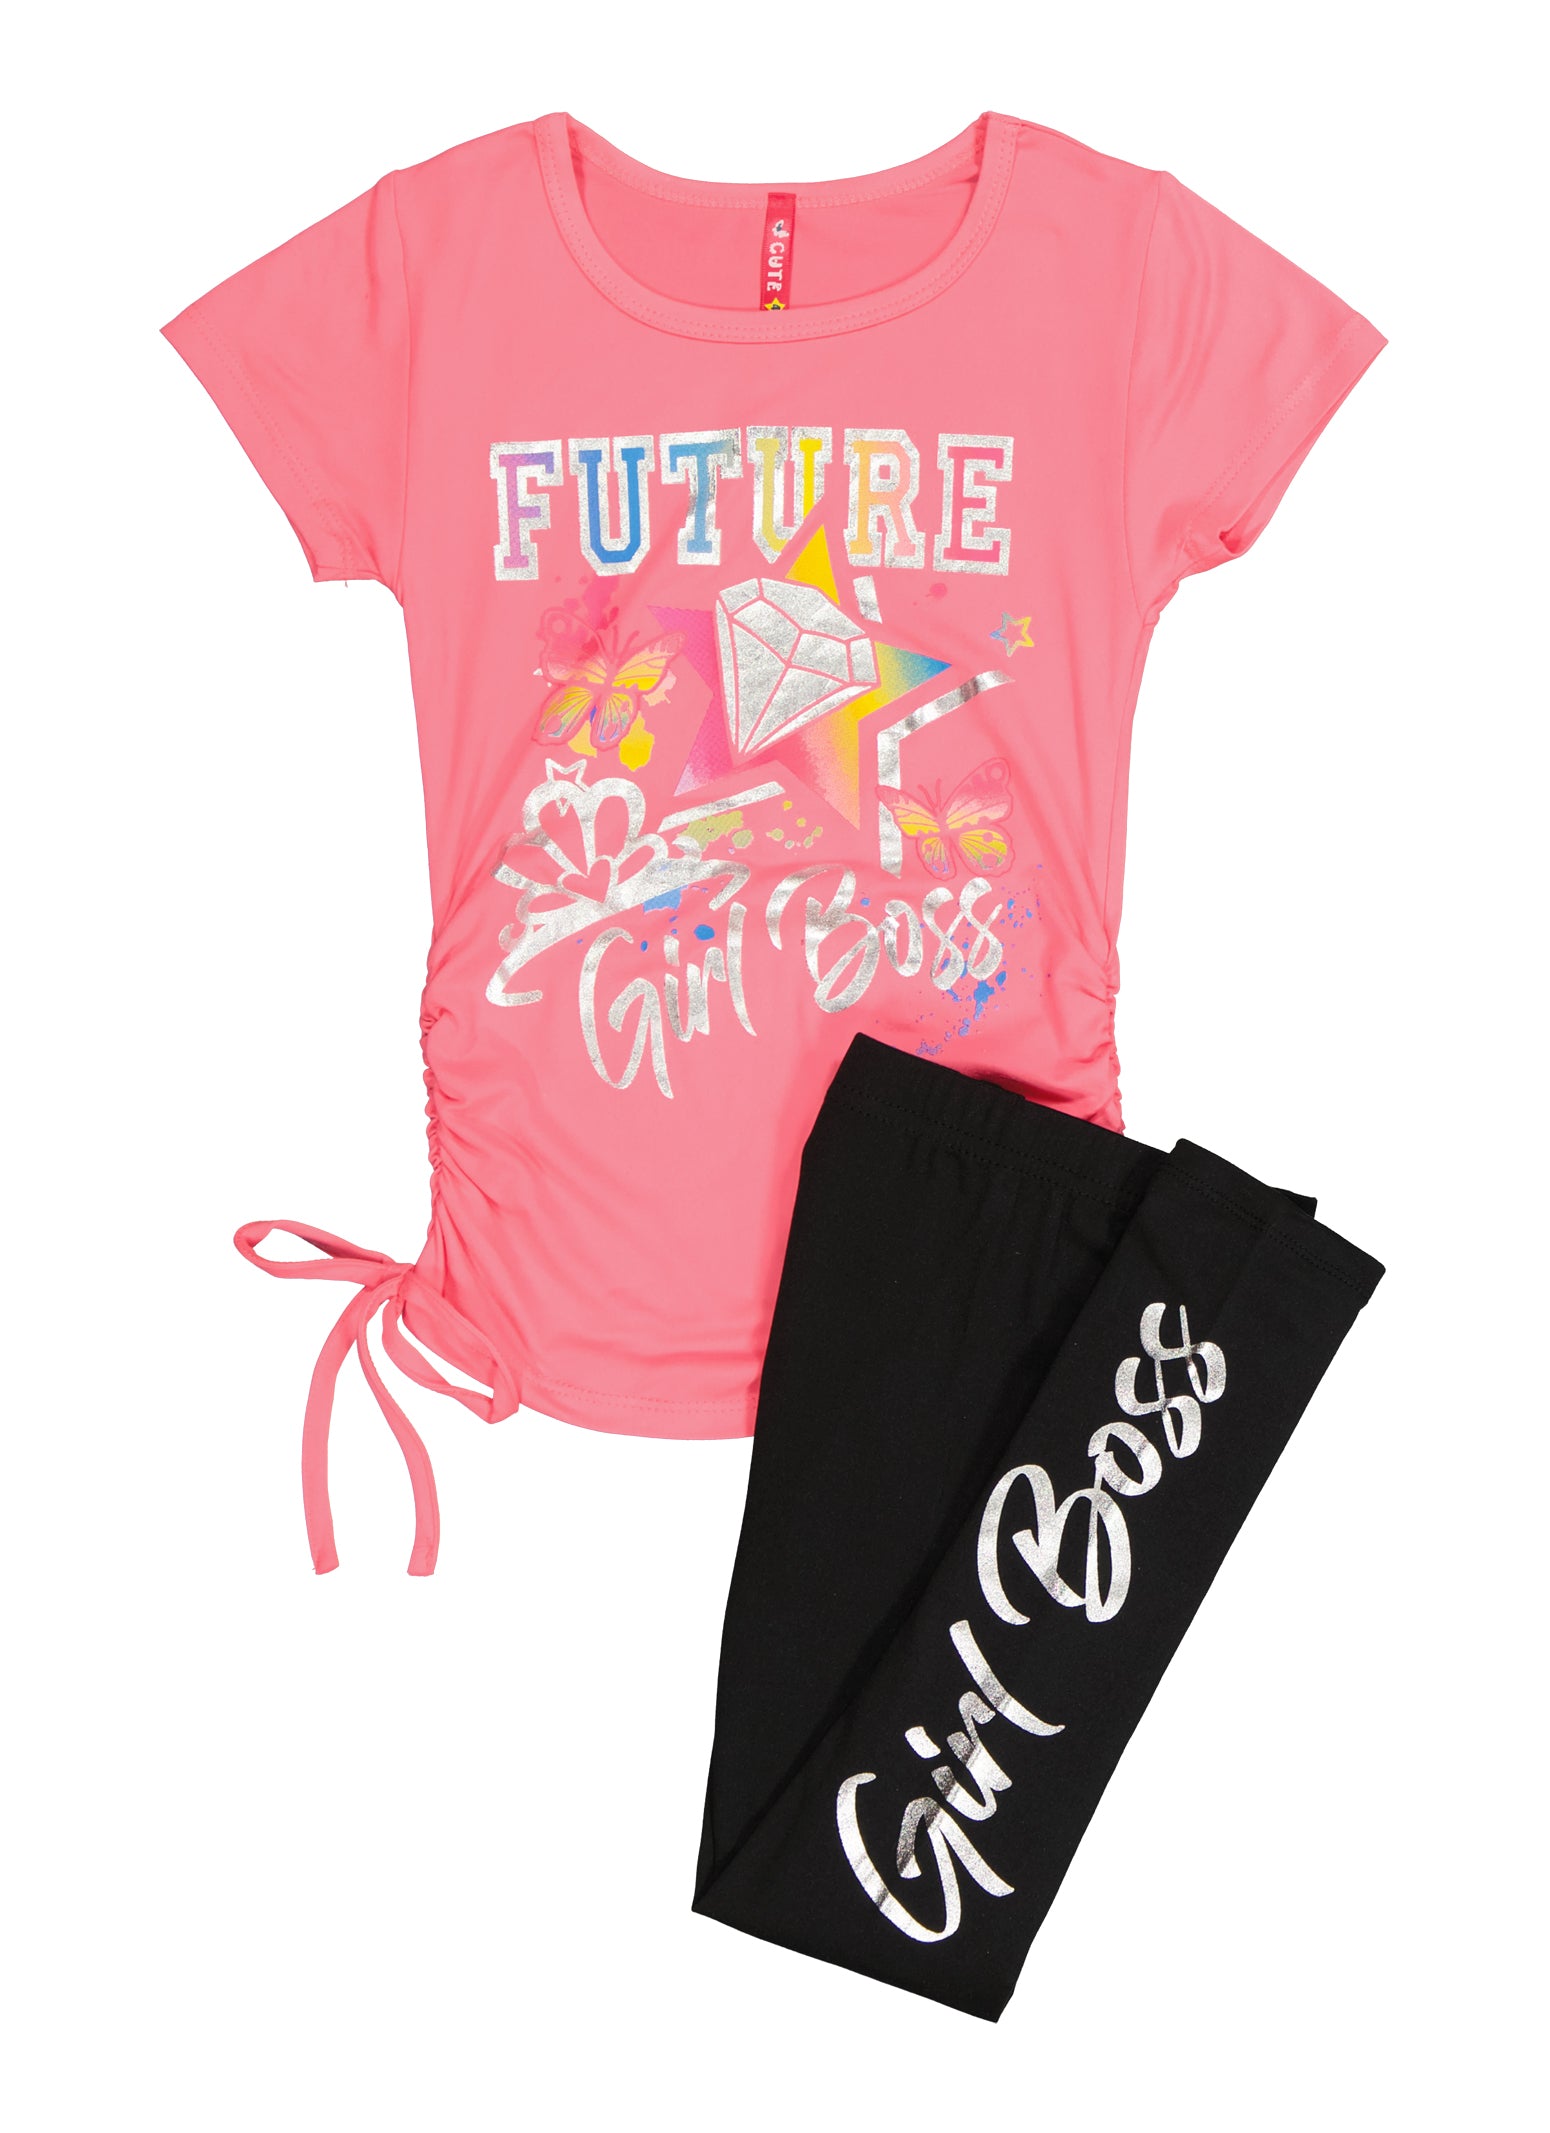 Little Girls Future Girl Boss Foil Graphic Tee and Leggings, Pink, Size 5-6